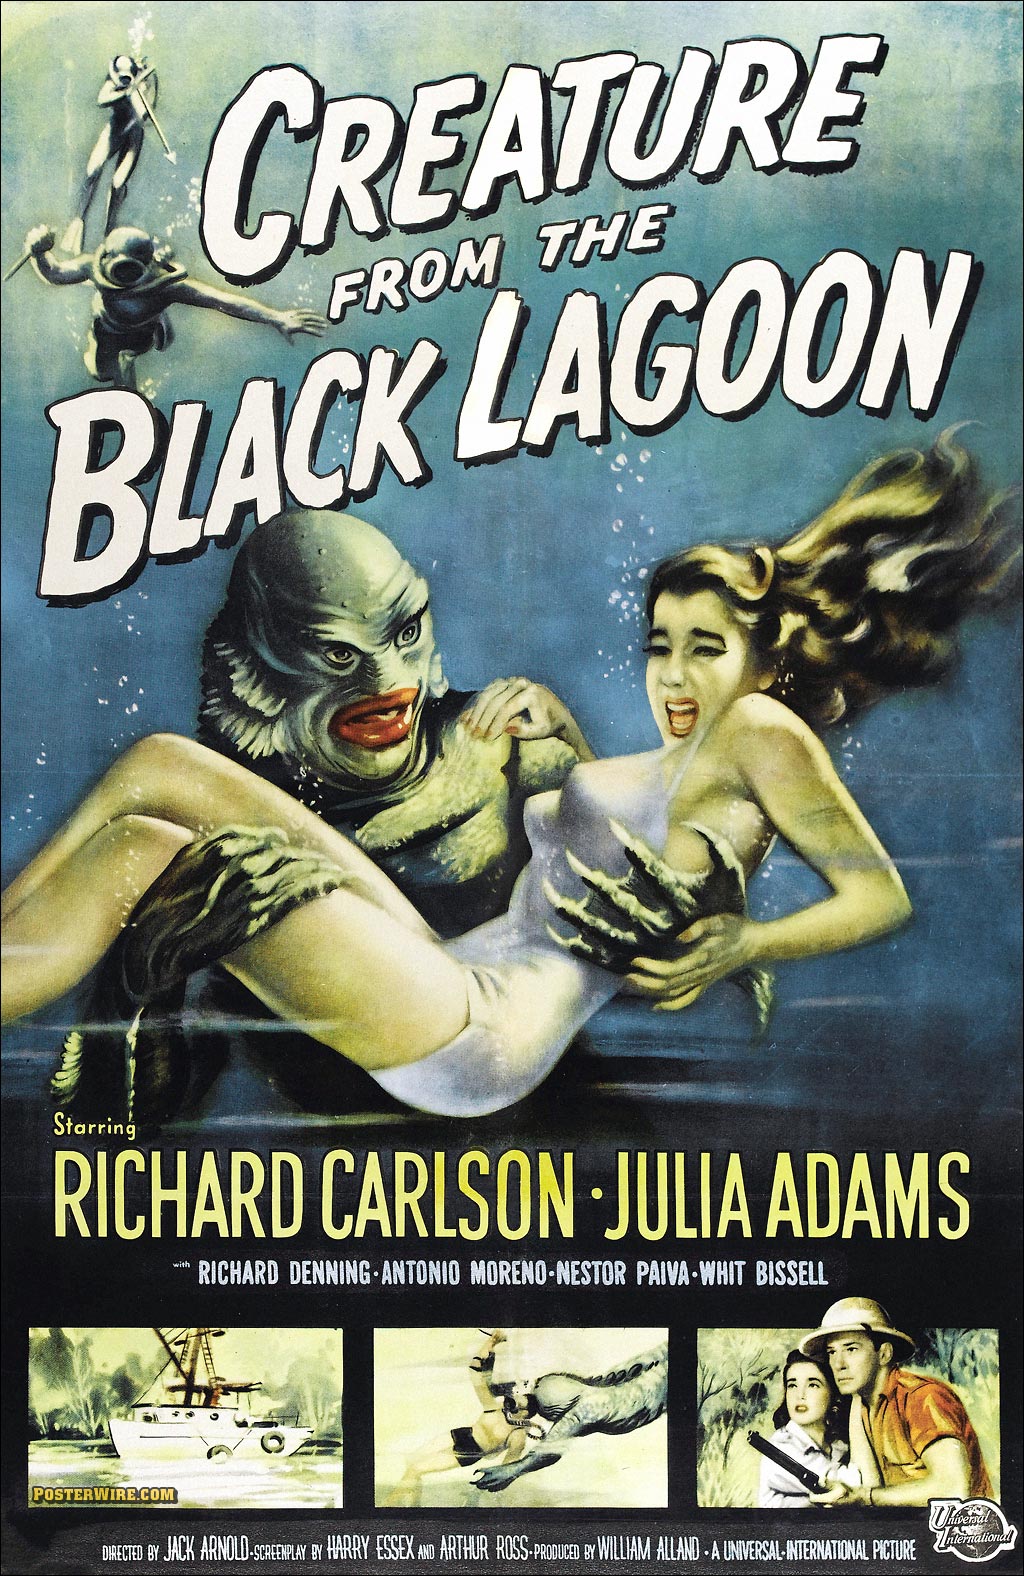 http://posterwire.com/wp-content/images/creature_from_black_lagoon.jpg